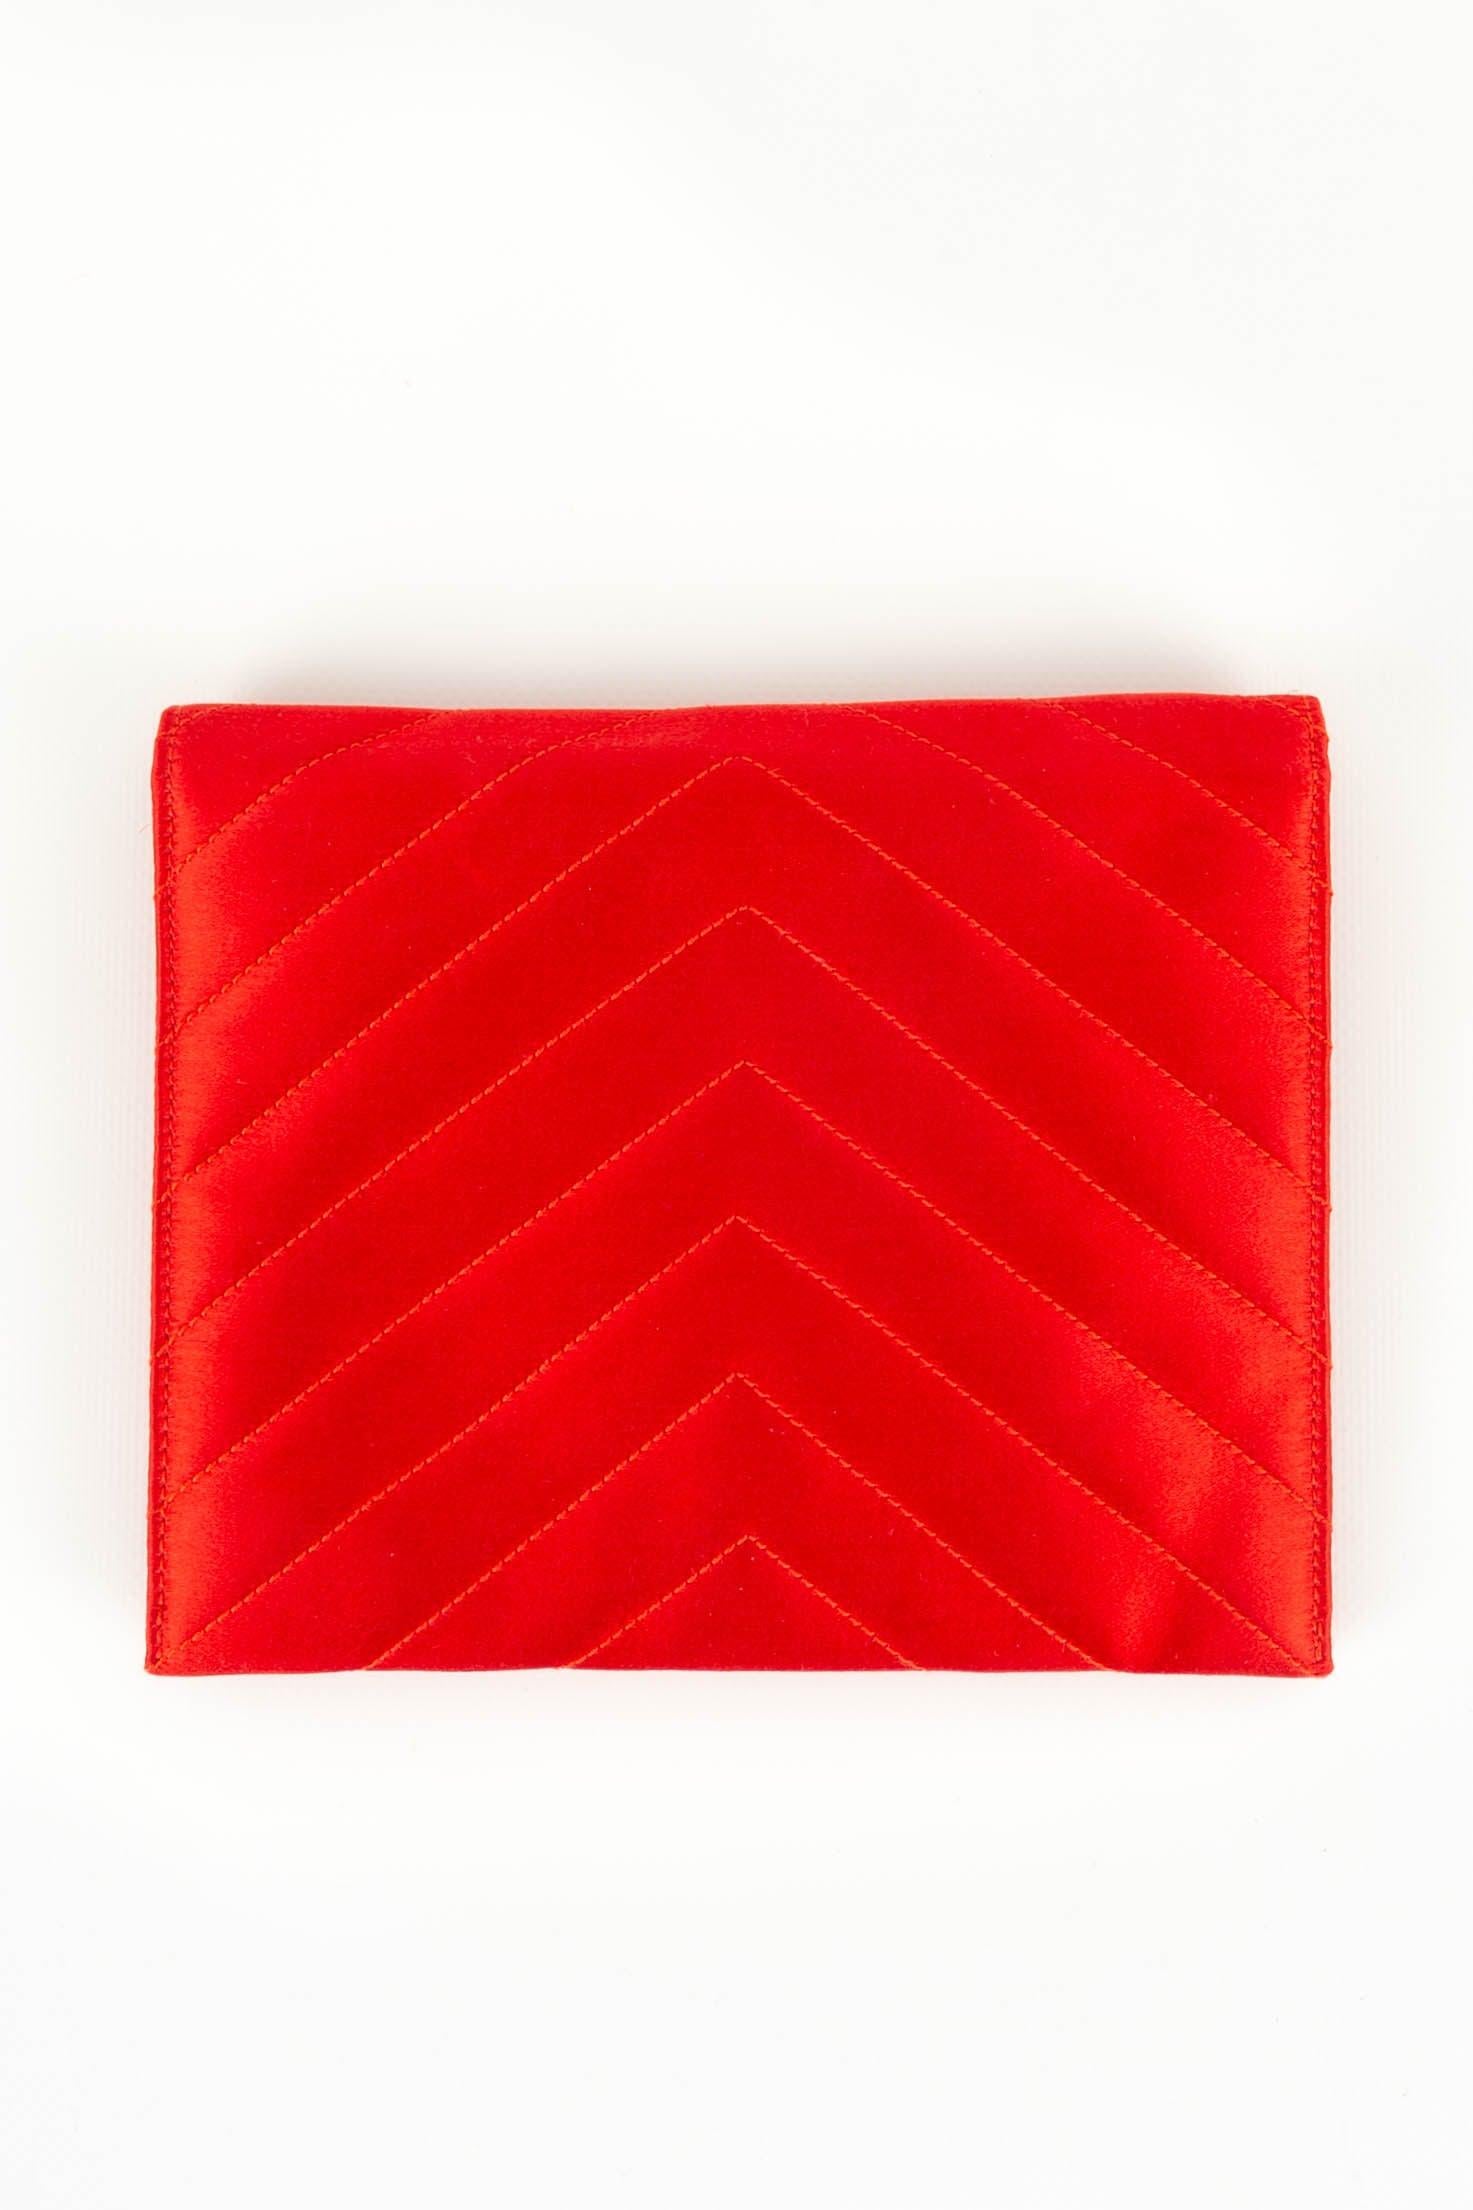 Red Yves Saint Laurent Quilted Satin Clutch For Sale